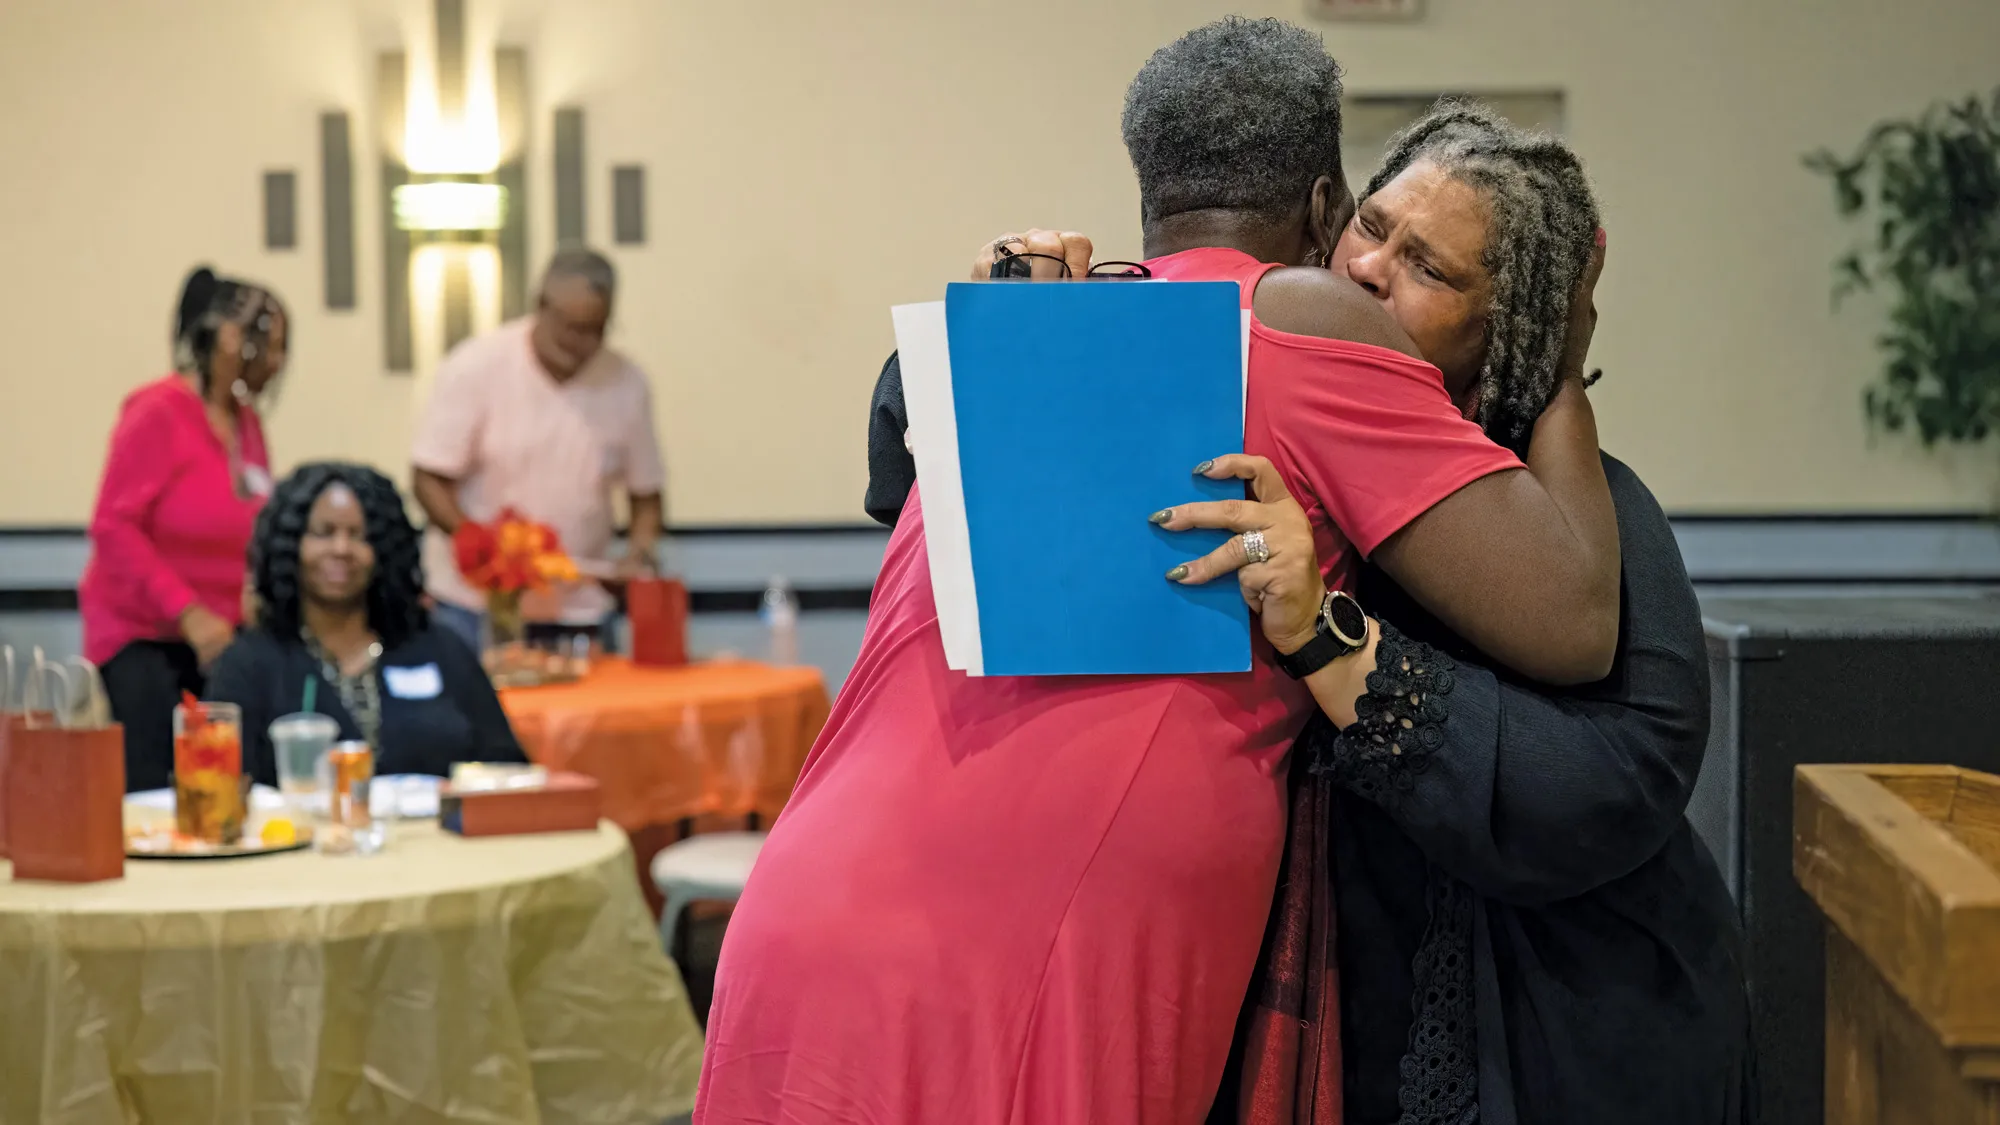 Palmer gets a comforting hug from a woman who listened to her speech. That woman can only be seen from the back, and Patrice’s expression suggests she has given her all, and been through a lot of emotions, as she shared her personal story. 